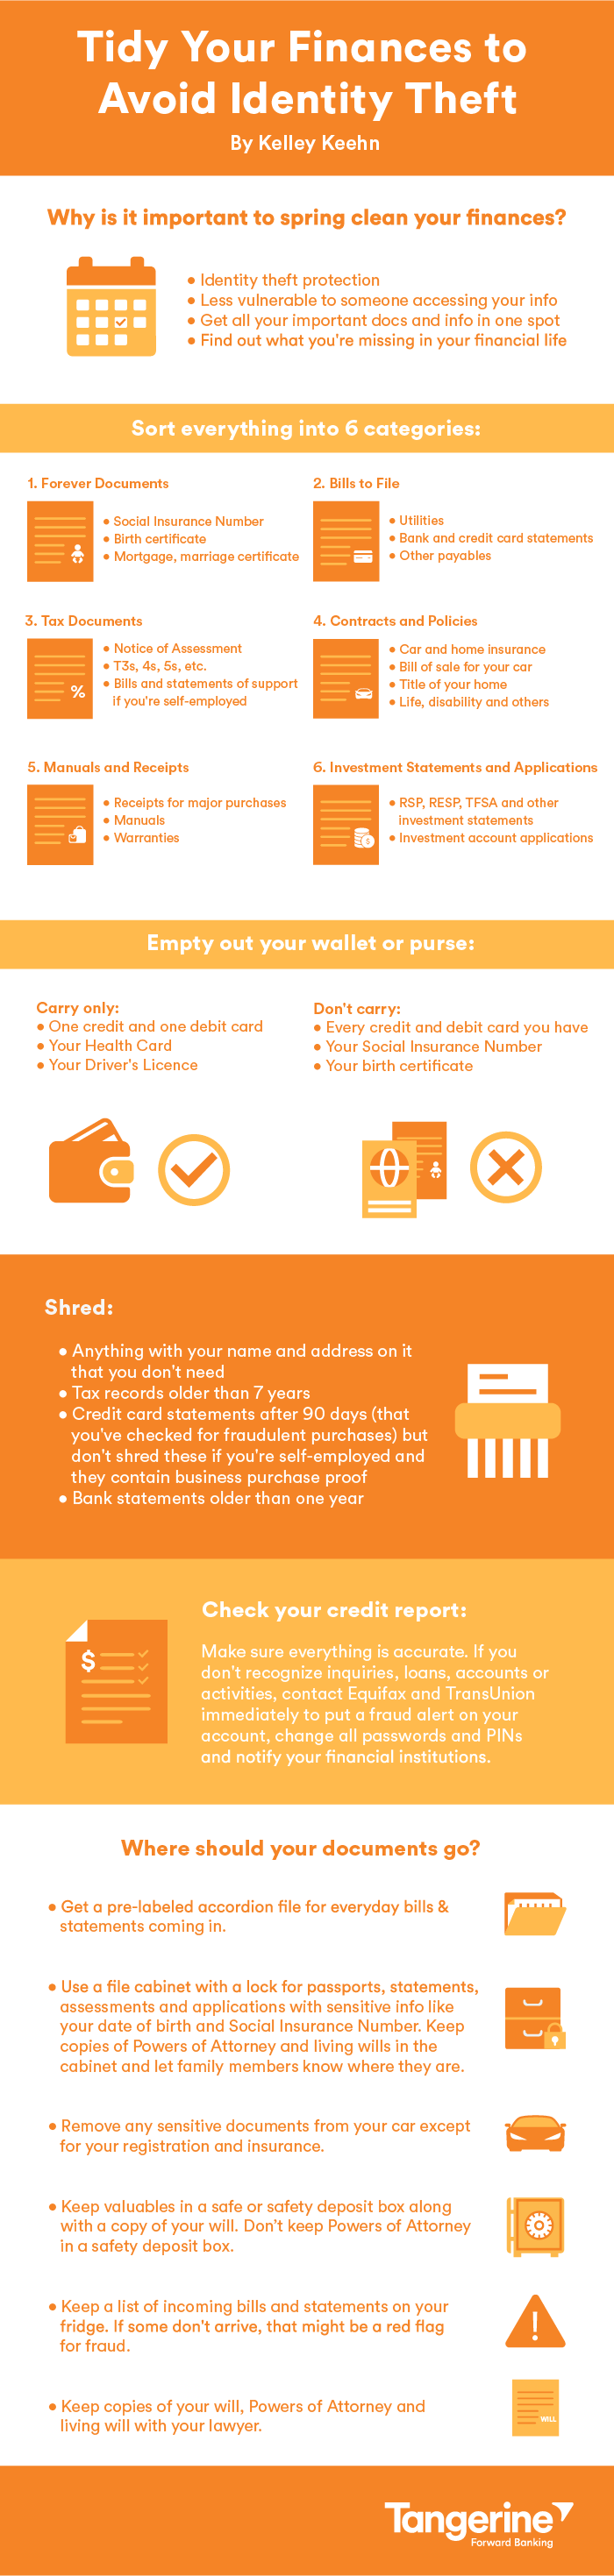 Infographic with ways to tidy your finances to avoid identity theft